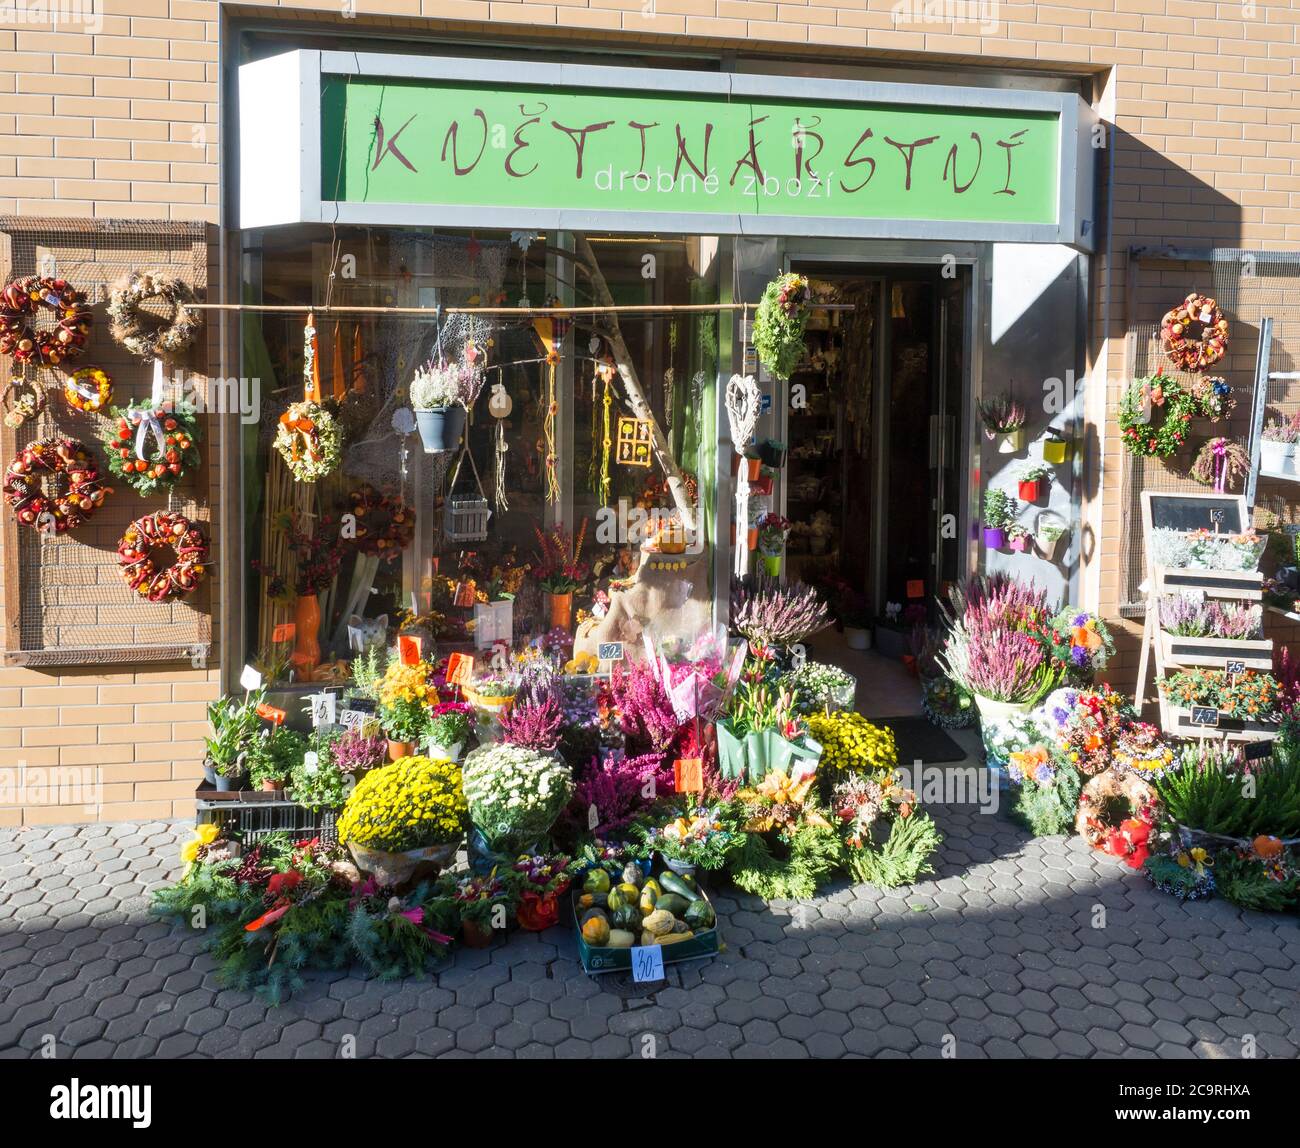 Czech Republic, Prague, Karlin, March 31, 2019: florist shop window,  entrance decorated with planty of displayed colorful fresh and dry flowers  and Stock Photo - Alamy